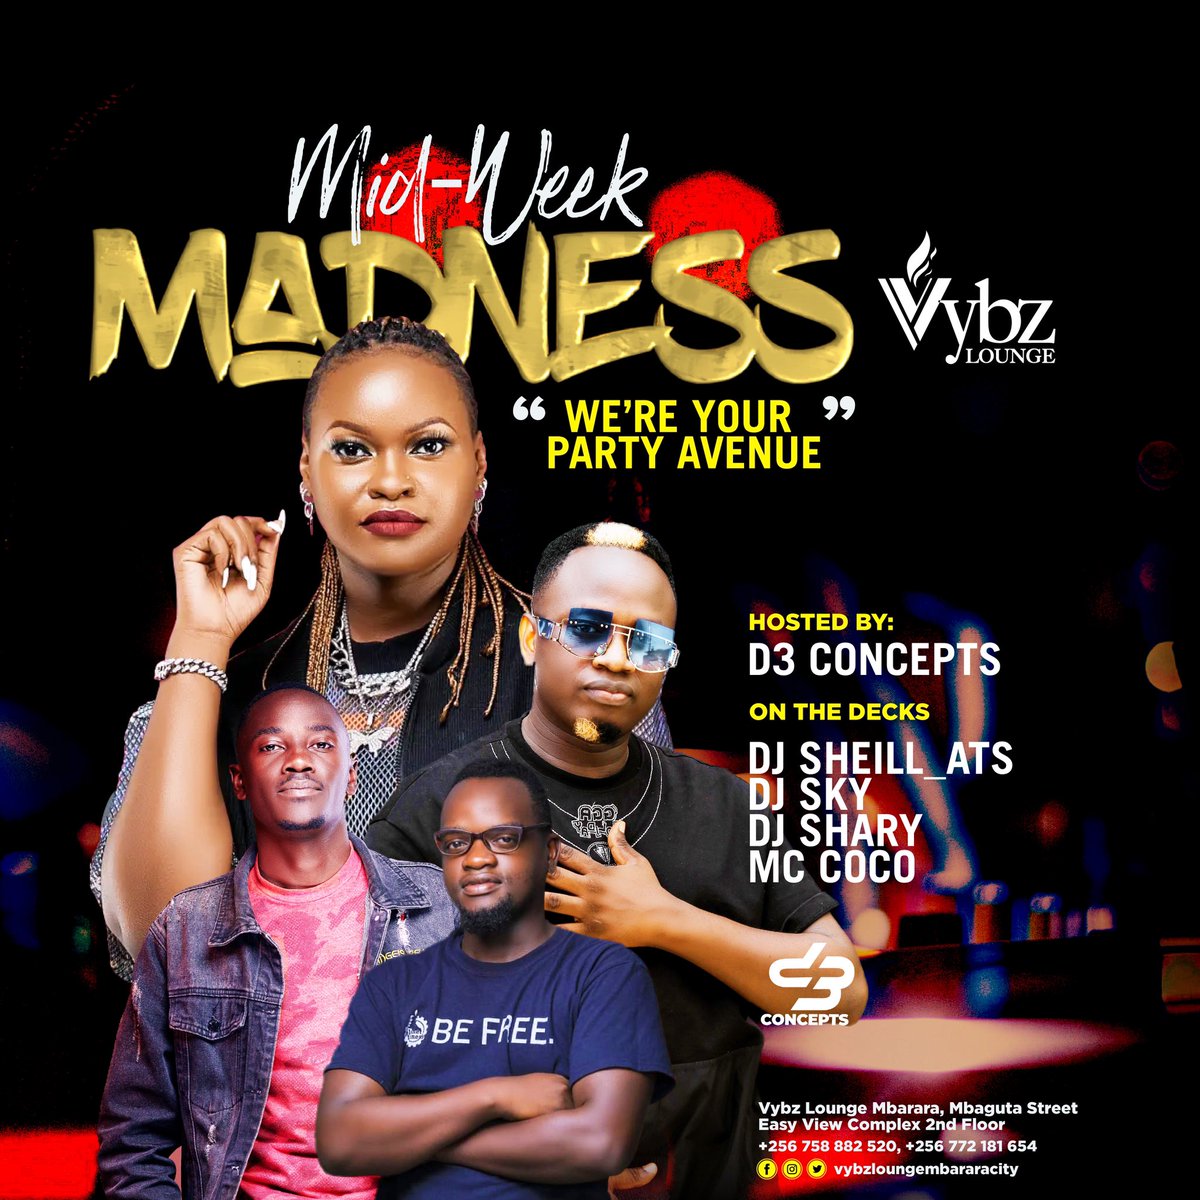 It’s a weno konka it’s feels like a sato 🤗. Go out tonight, eat some good food, drink up & have fun all night long 😋🍻 we’re your party Avenue #MidWeekMadness 🔥 Hosted by @d3concept